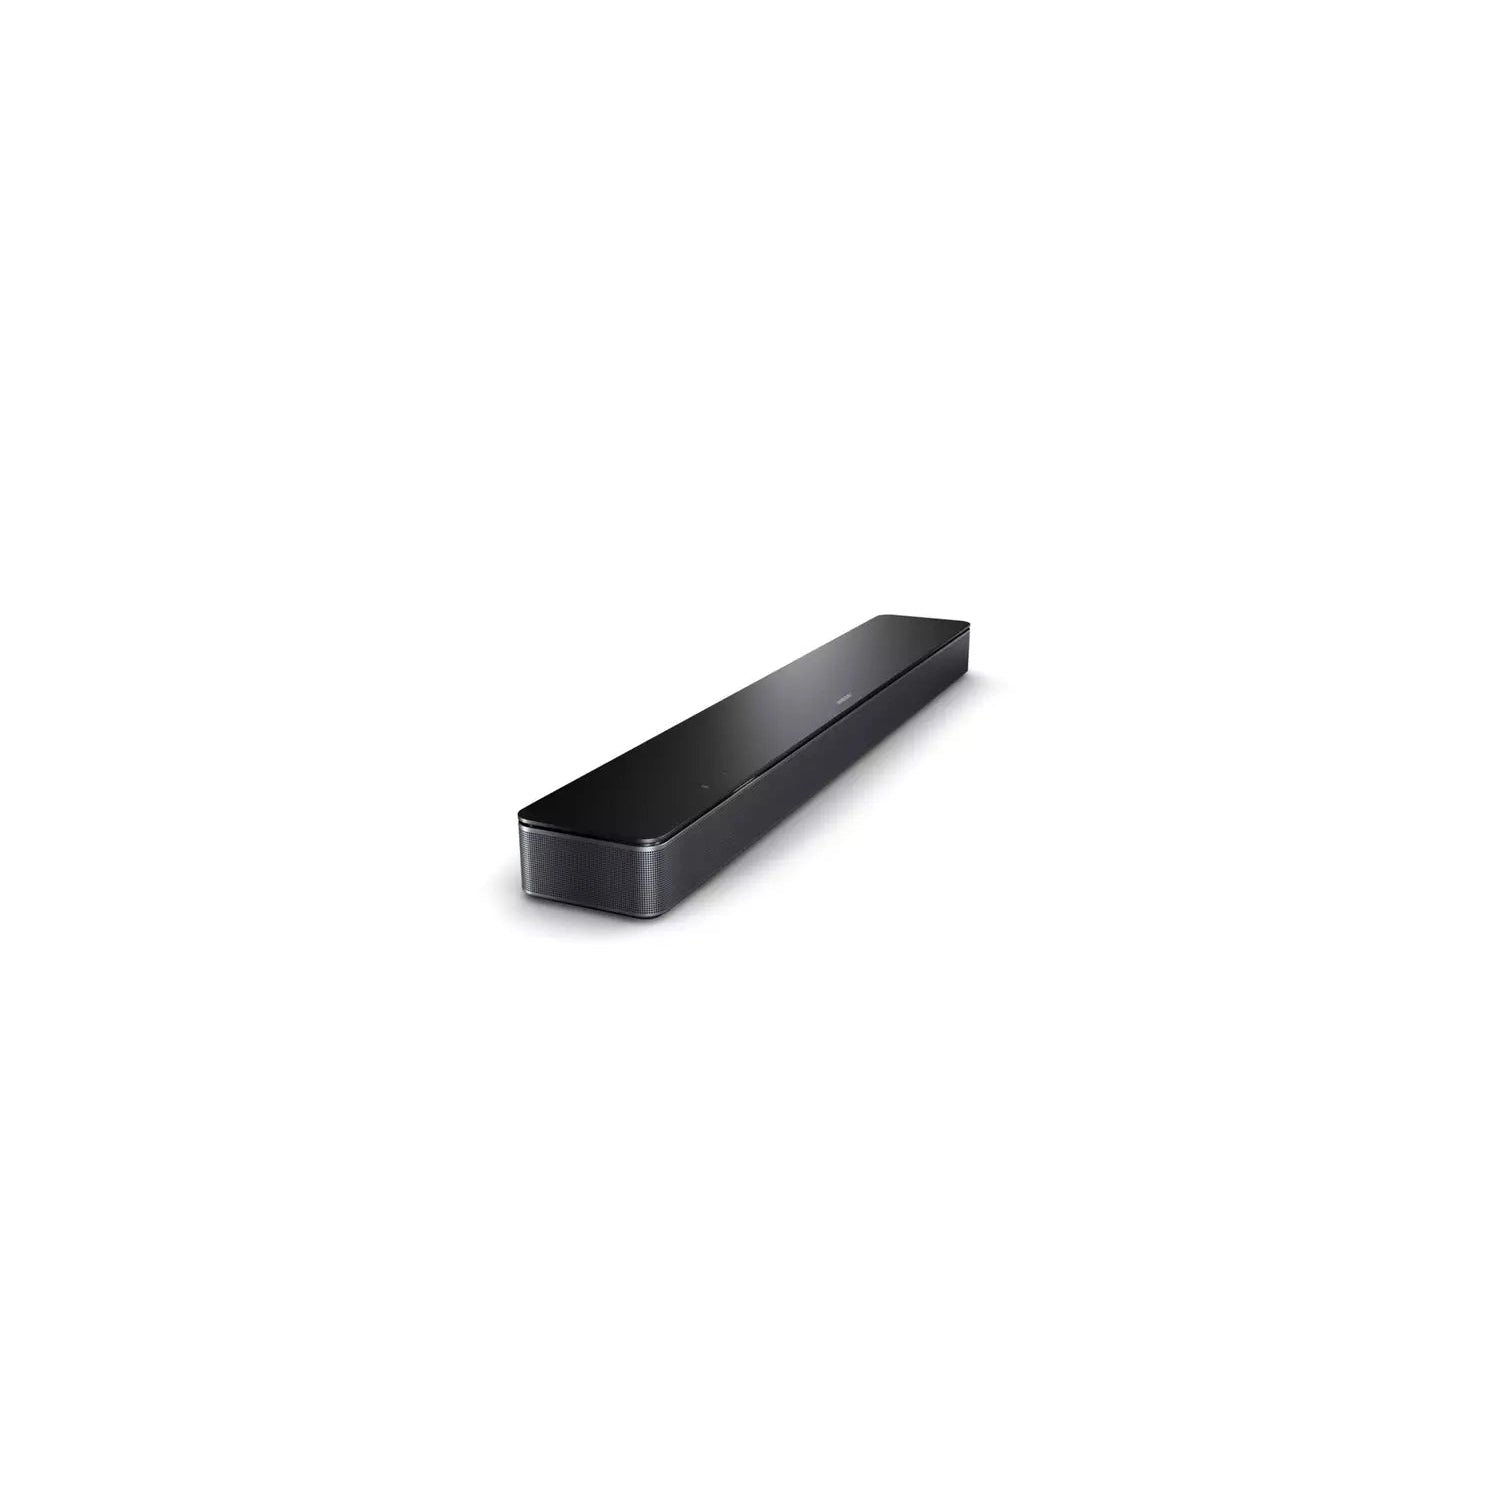 Bose 300 All In One Smart Bluetooth Sound Bar - Black